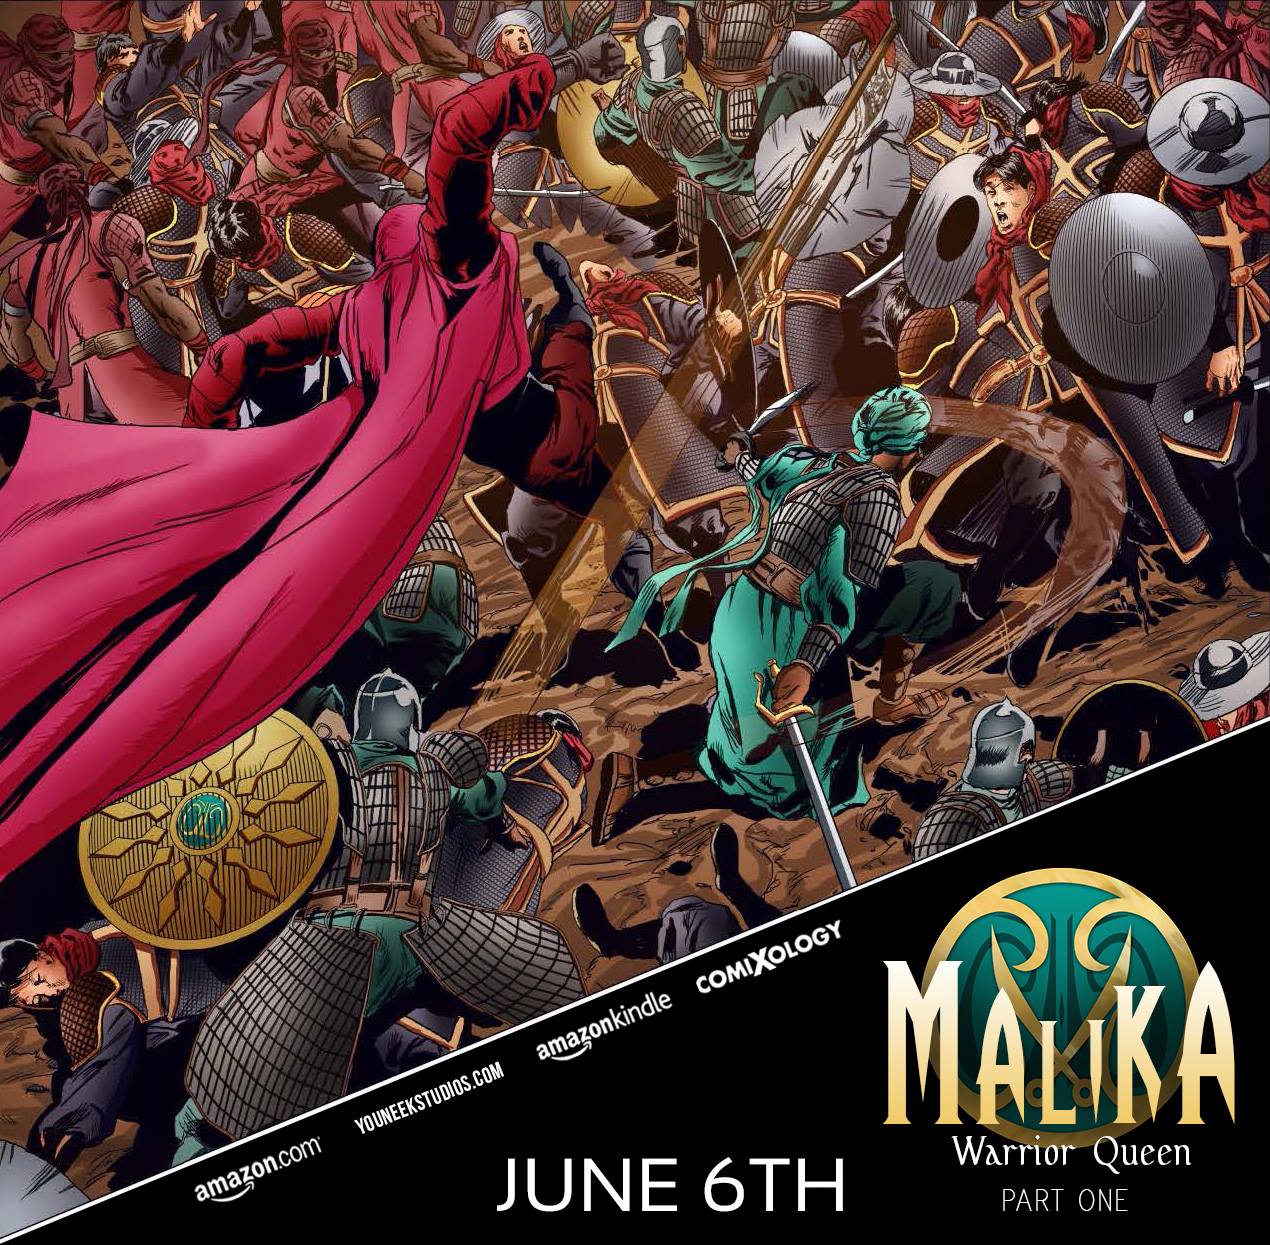 Promotional cover of Malika Warrior Queen  by YouNeek Studios